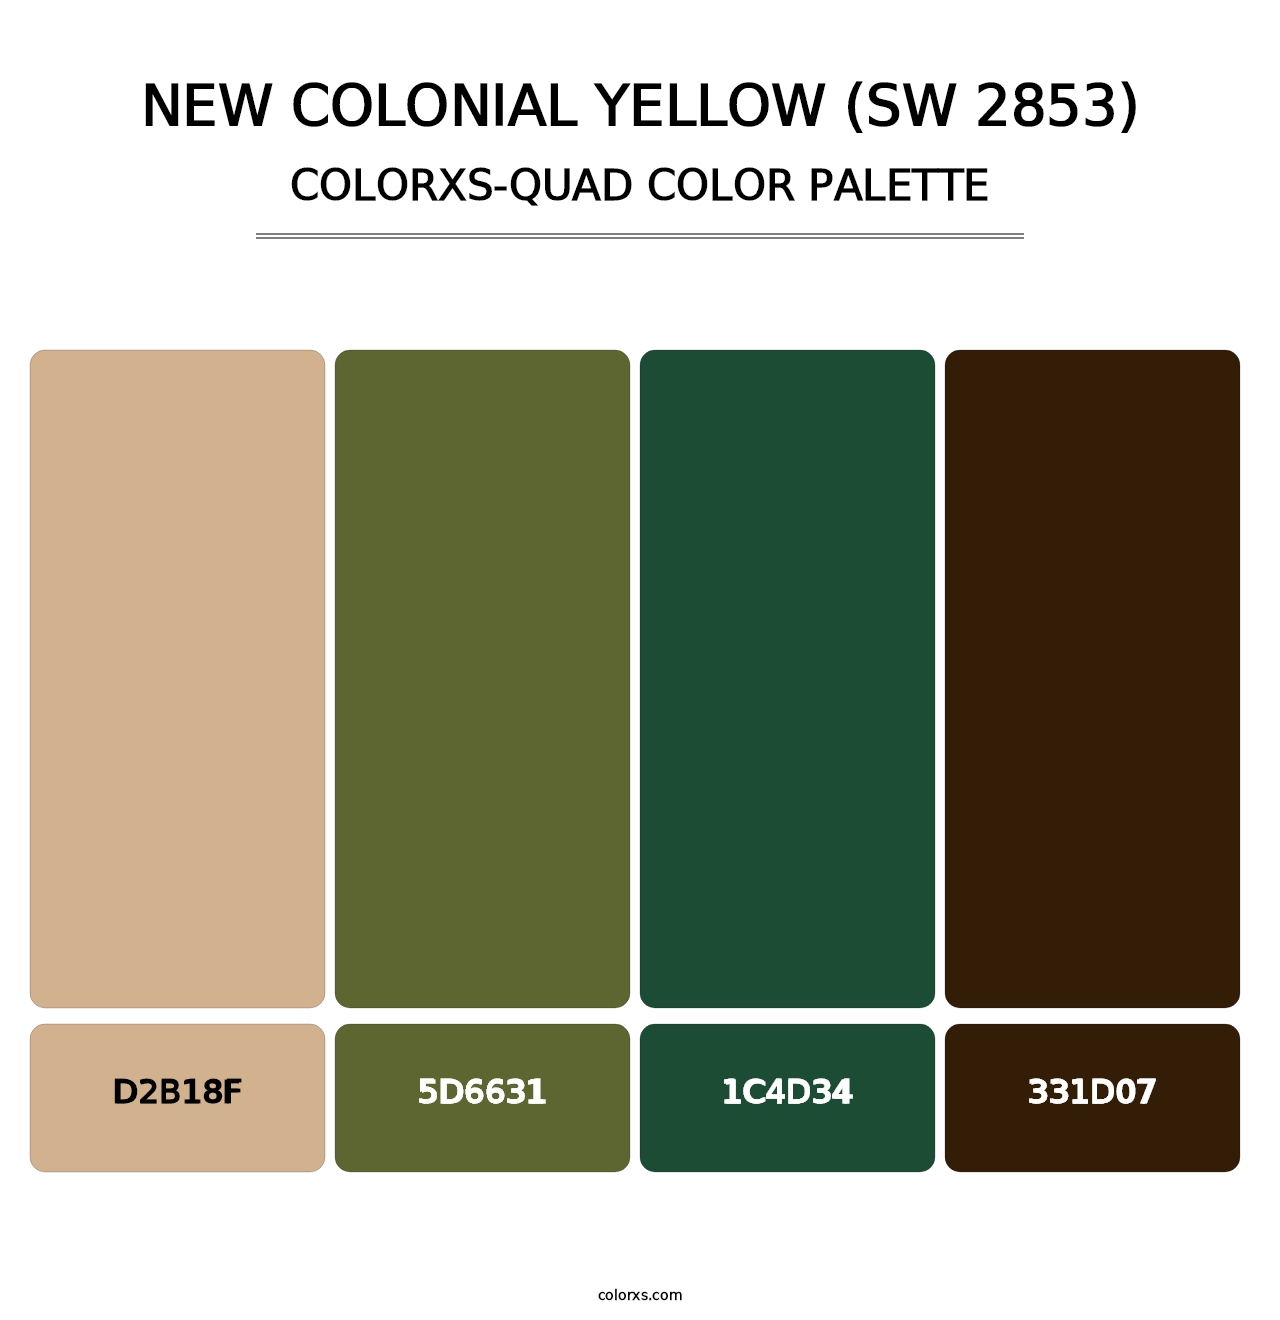 New Colonial Yellow (SW 2853) - Colorxs Quad Palette